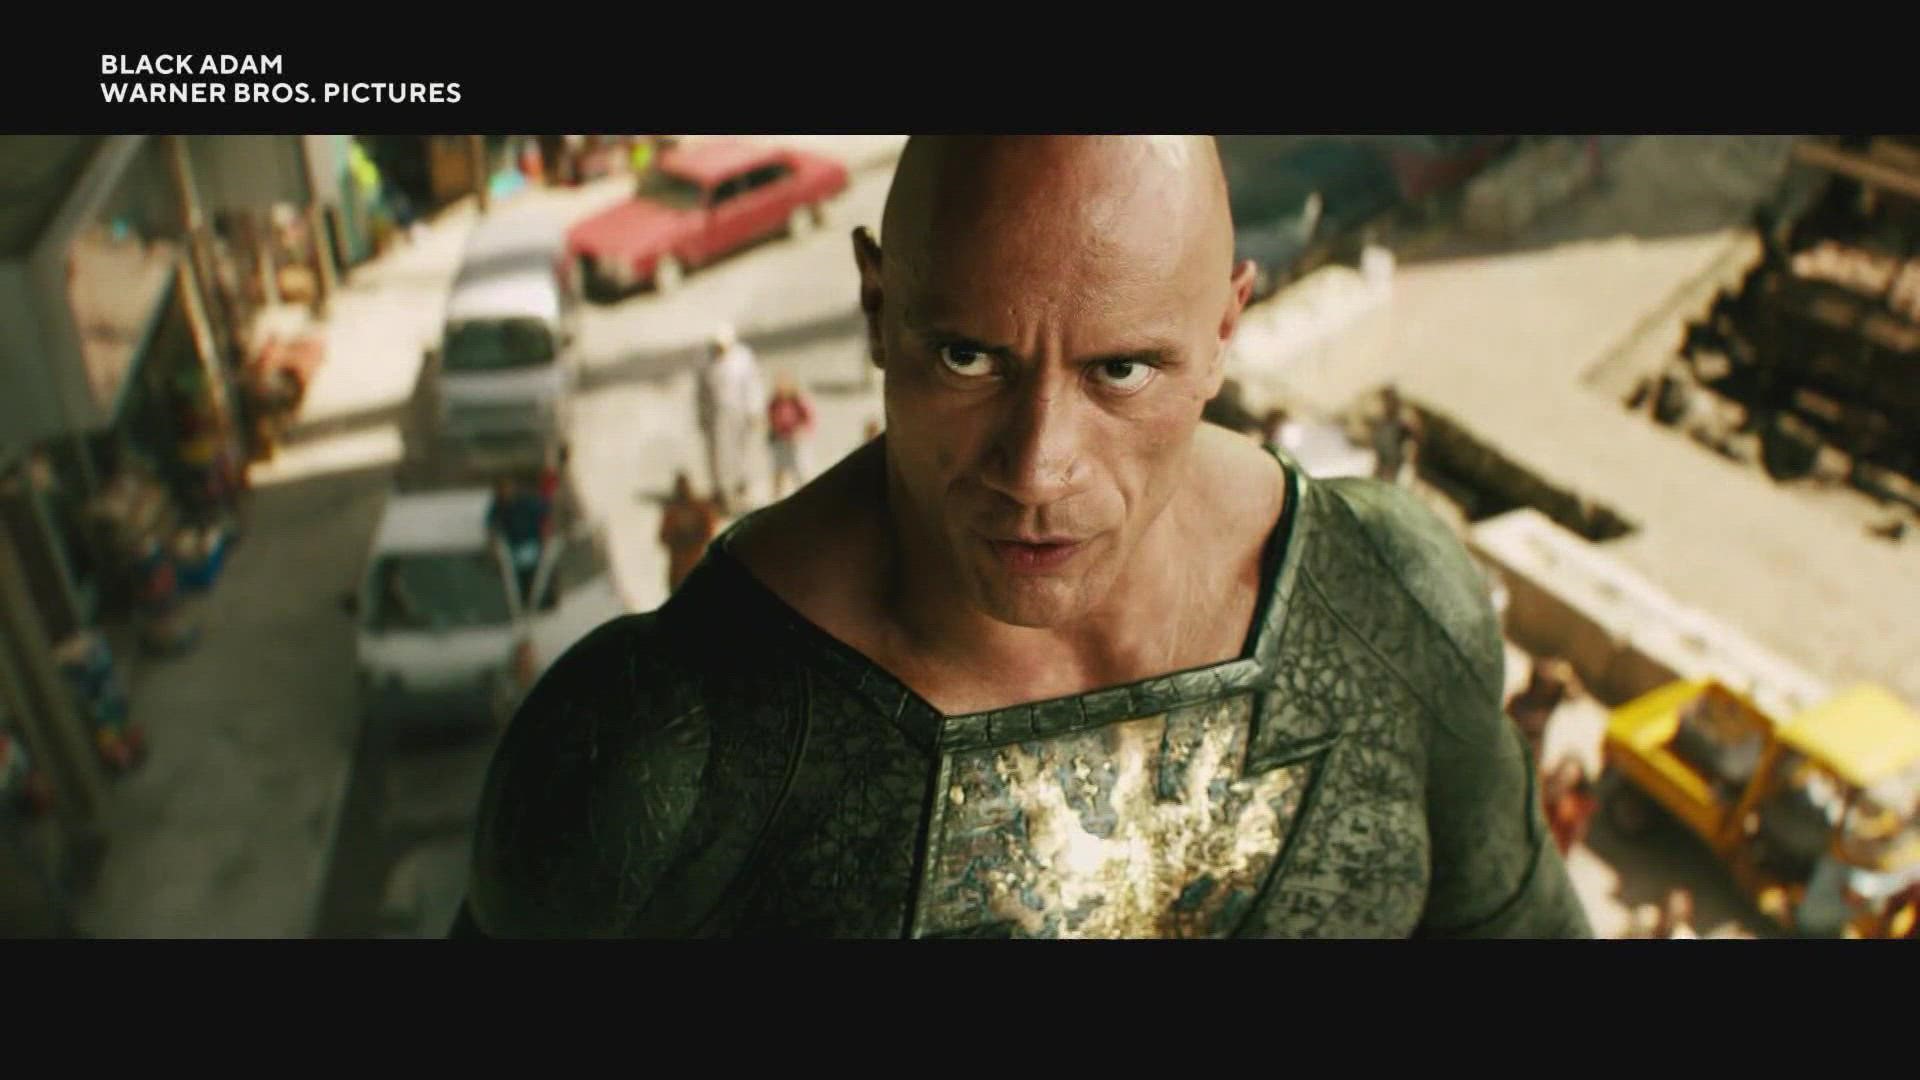 Rotten Tomatoes - The Rock is The Man in Black! Dwayne Johnson has